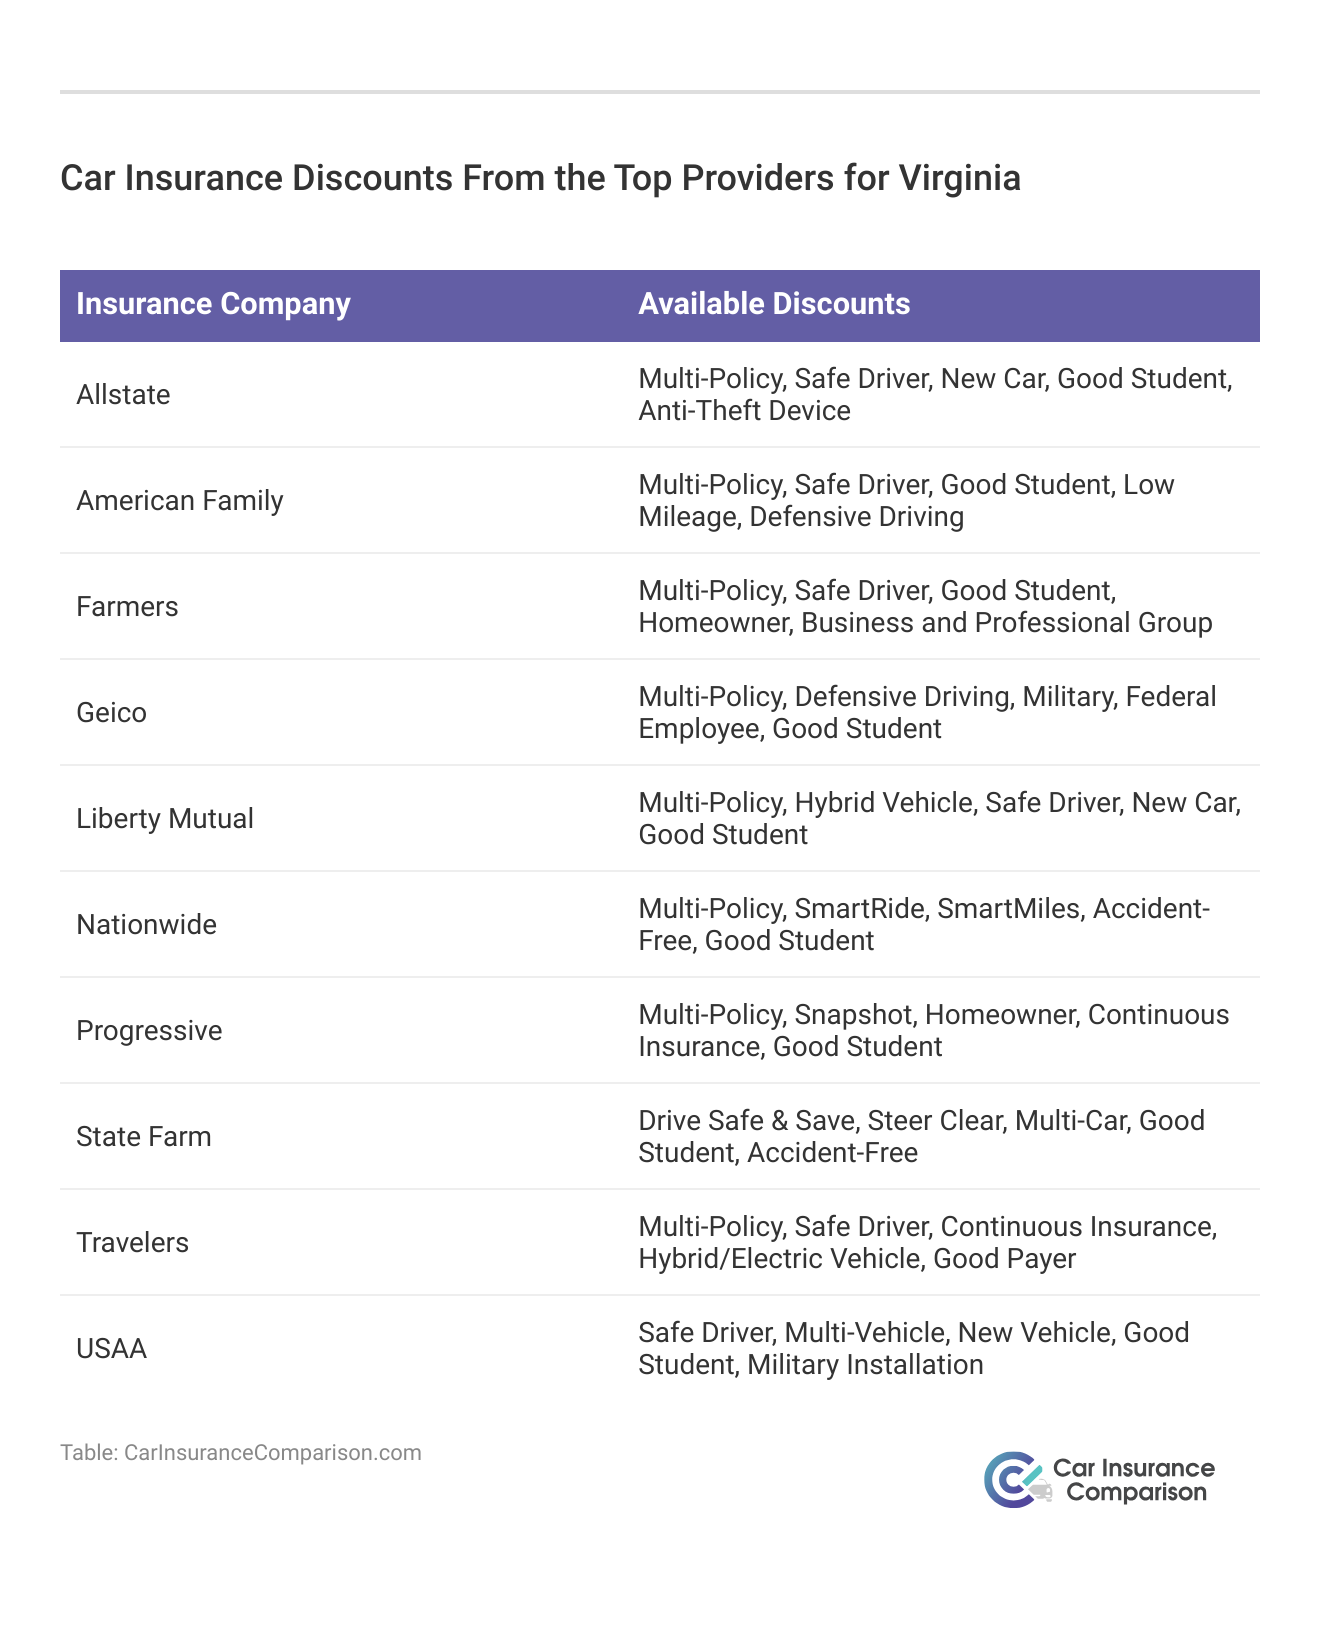 <h3>Car Insurance Discounts From the Top Providers for Virginia</h3>